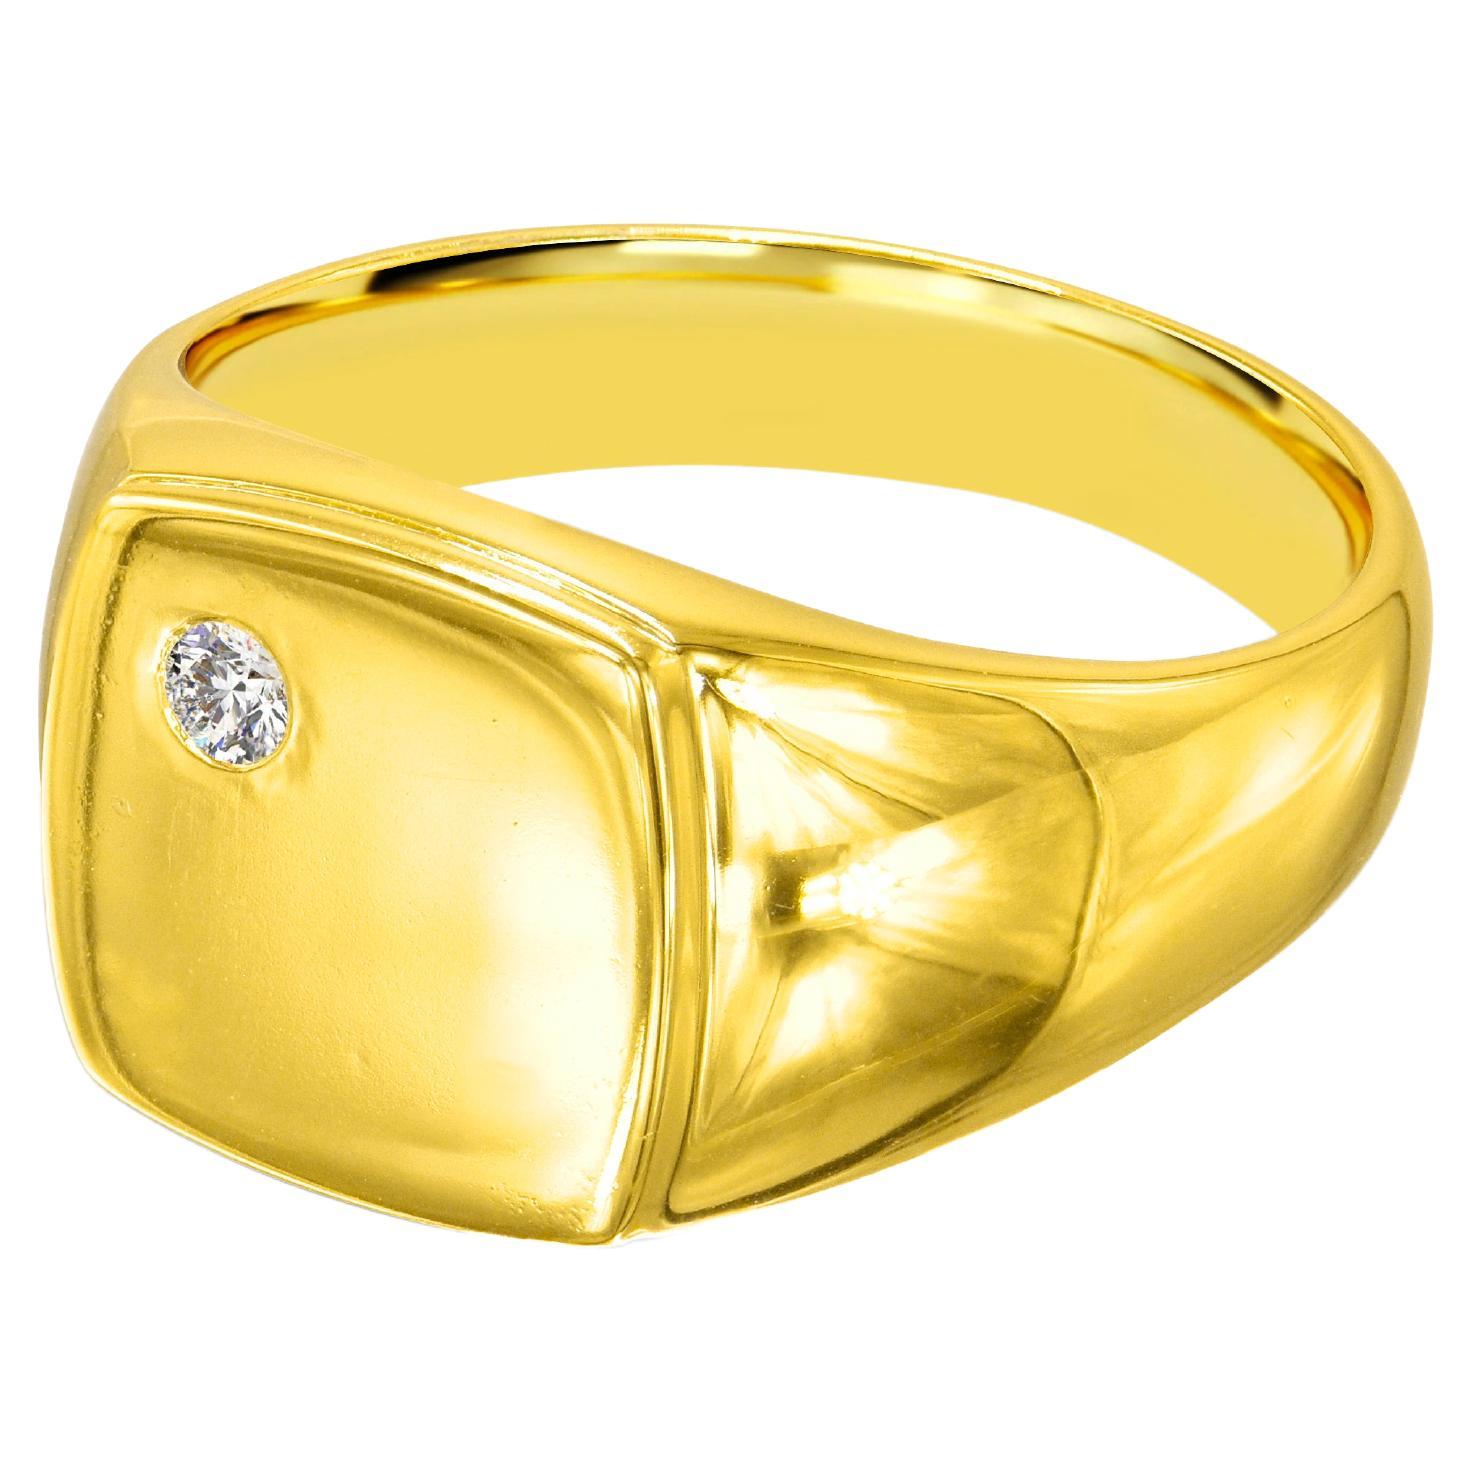 For Sale:  18K Gold filled Signet ring with 0.06 Carat Natural Diamond